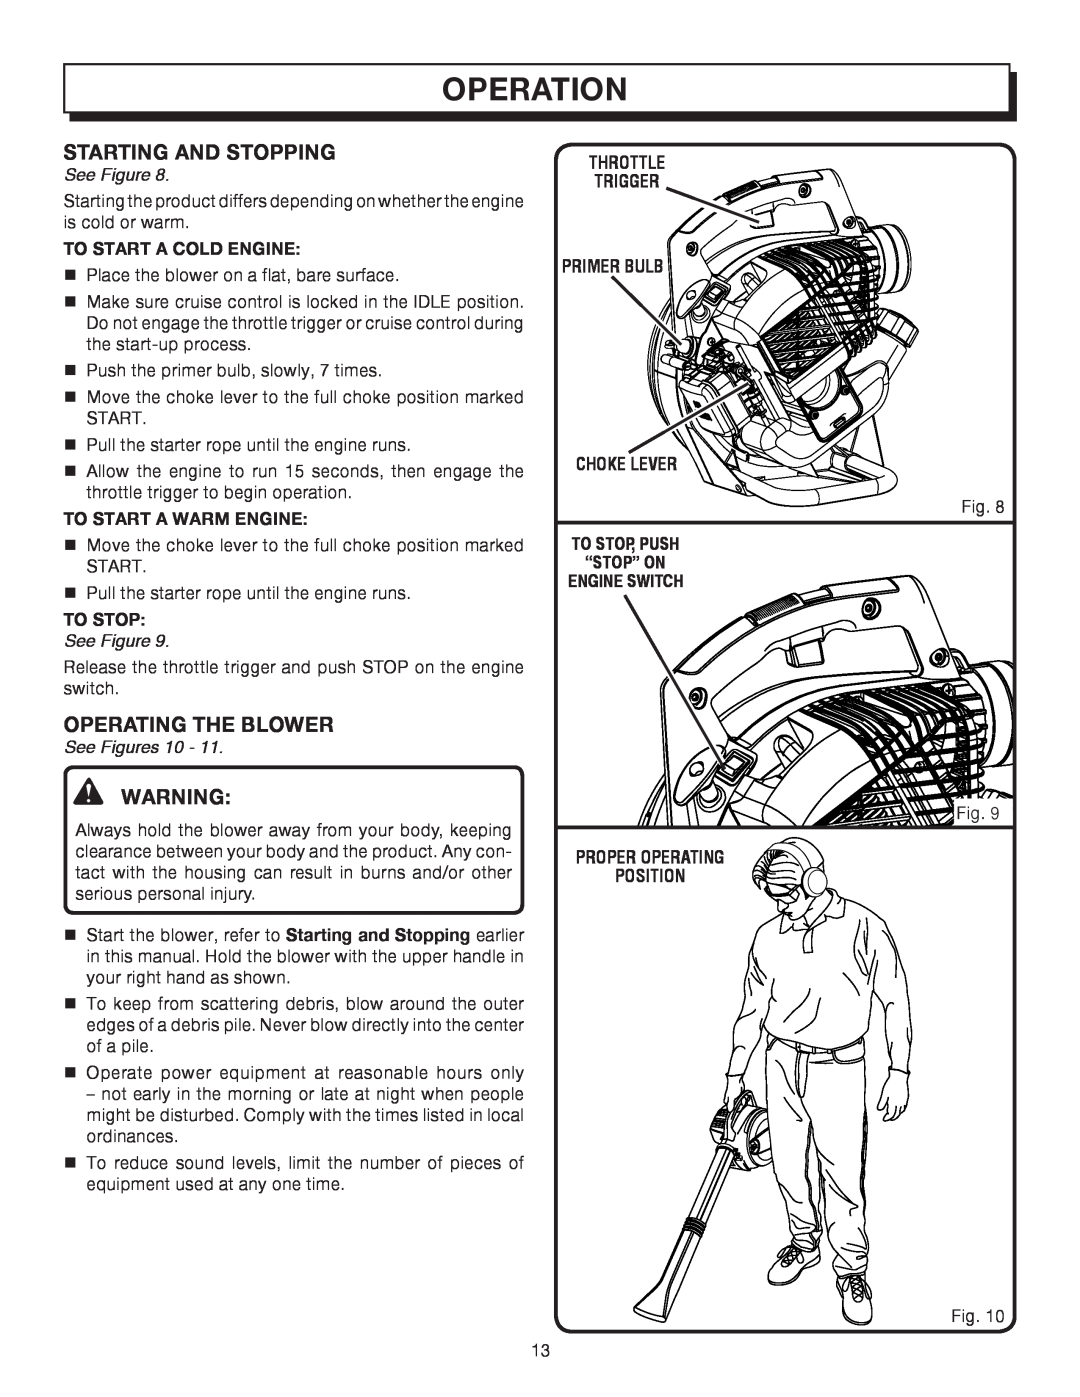 Homelite UT08542A manual Operation, To Start A Cold Engine, To Start A Warm Engine, To Stop, See Figures 